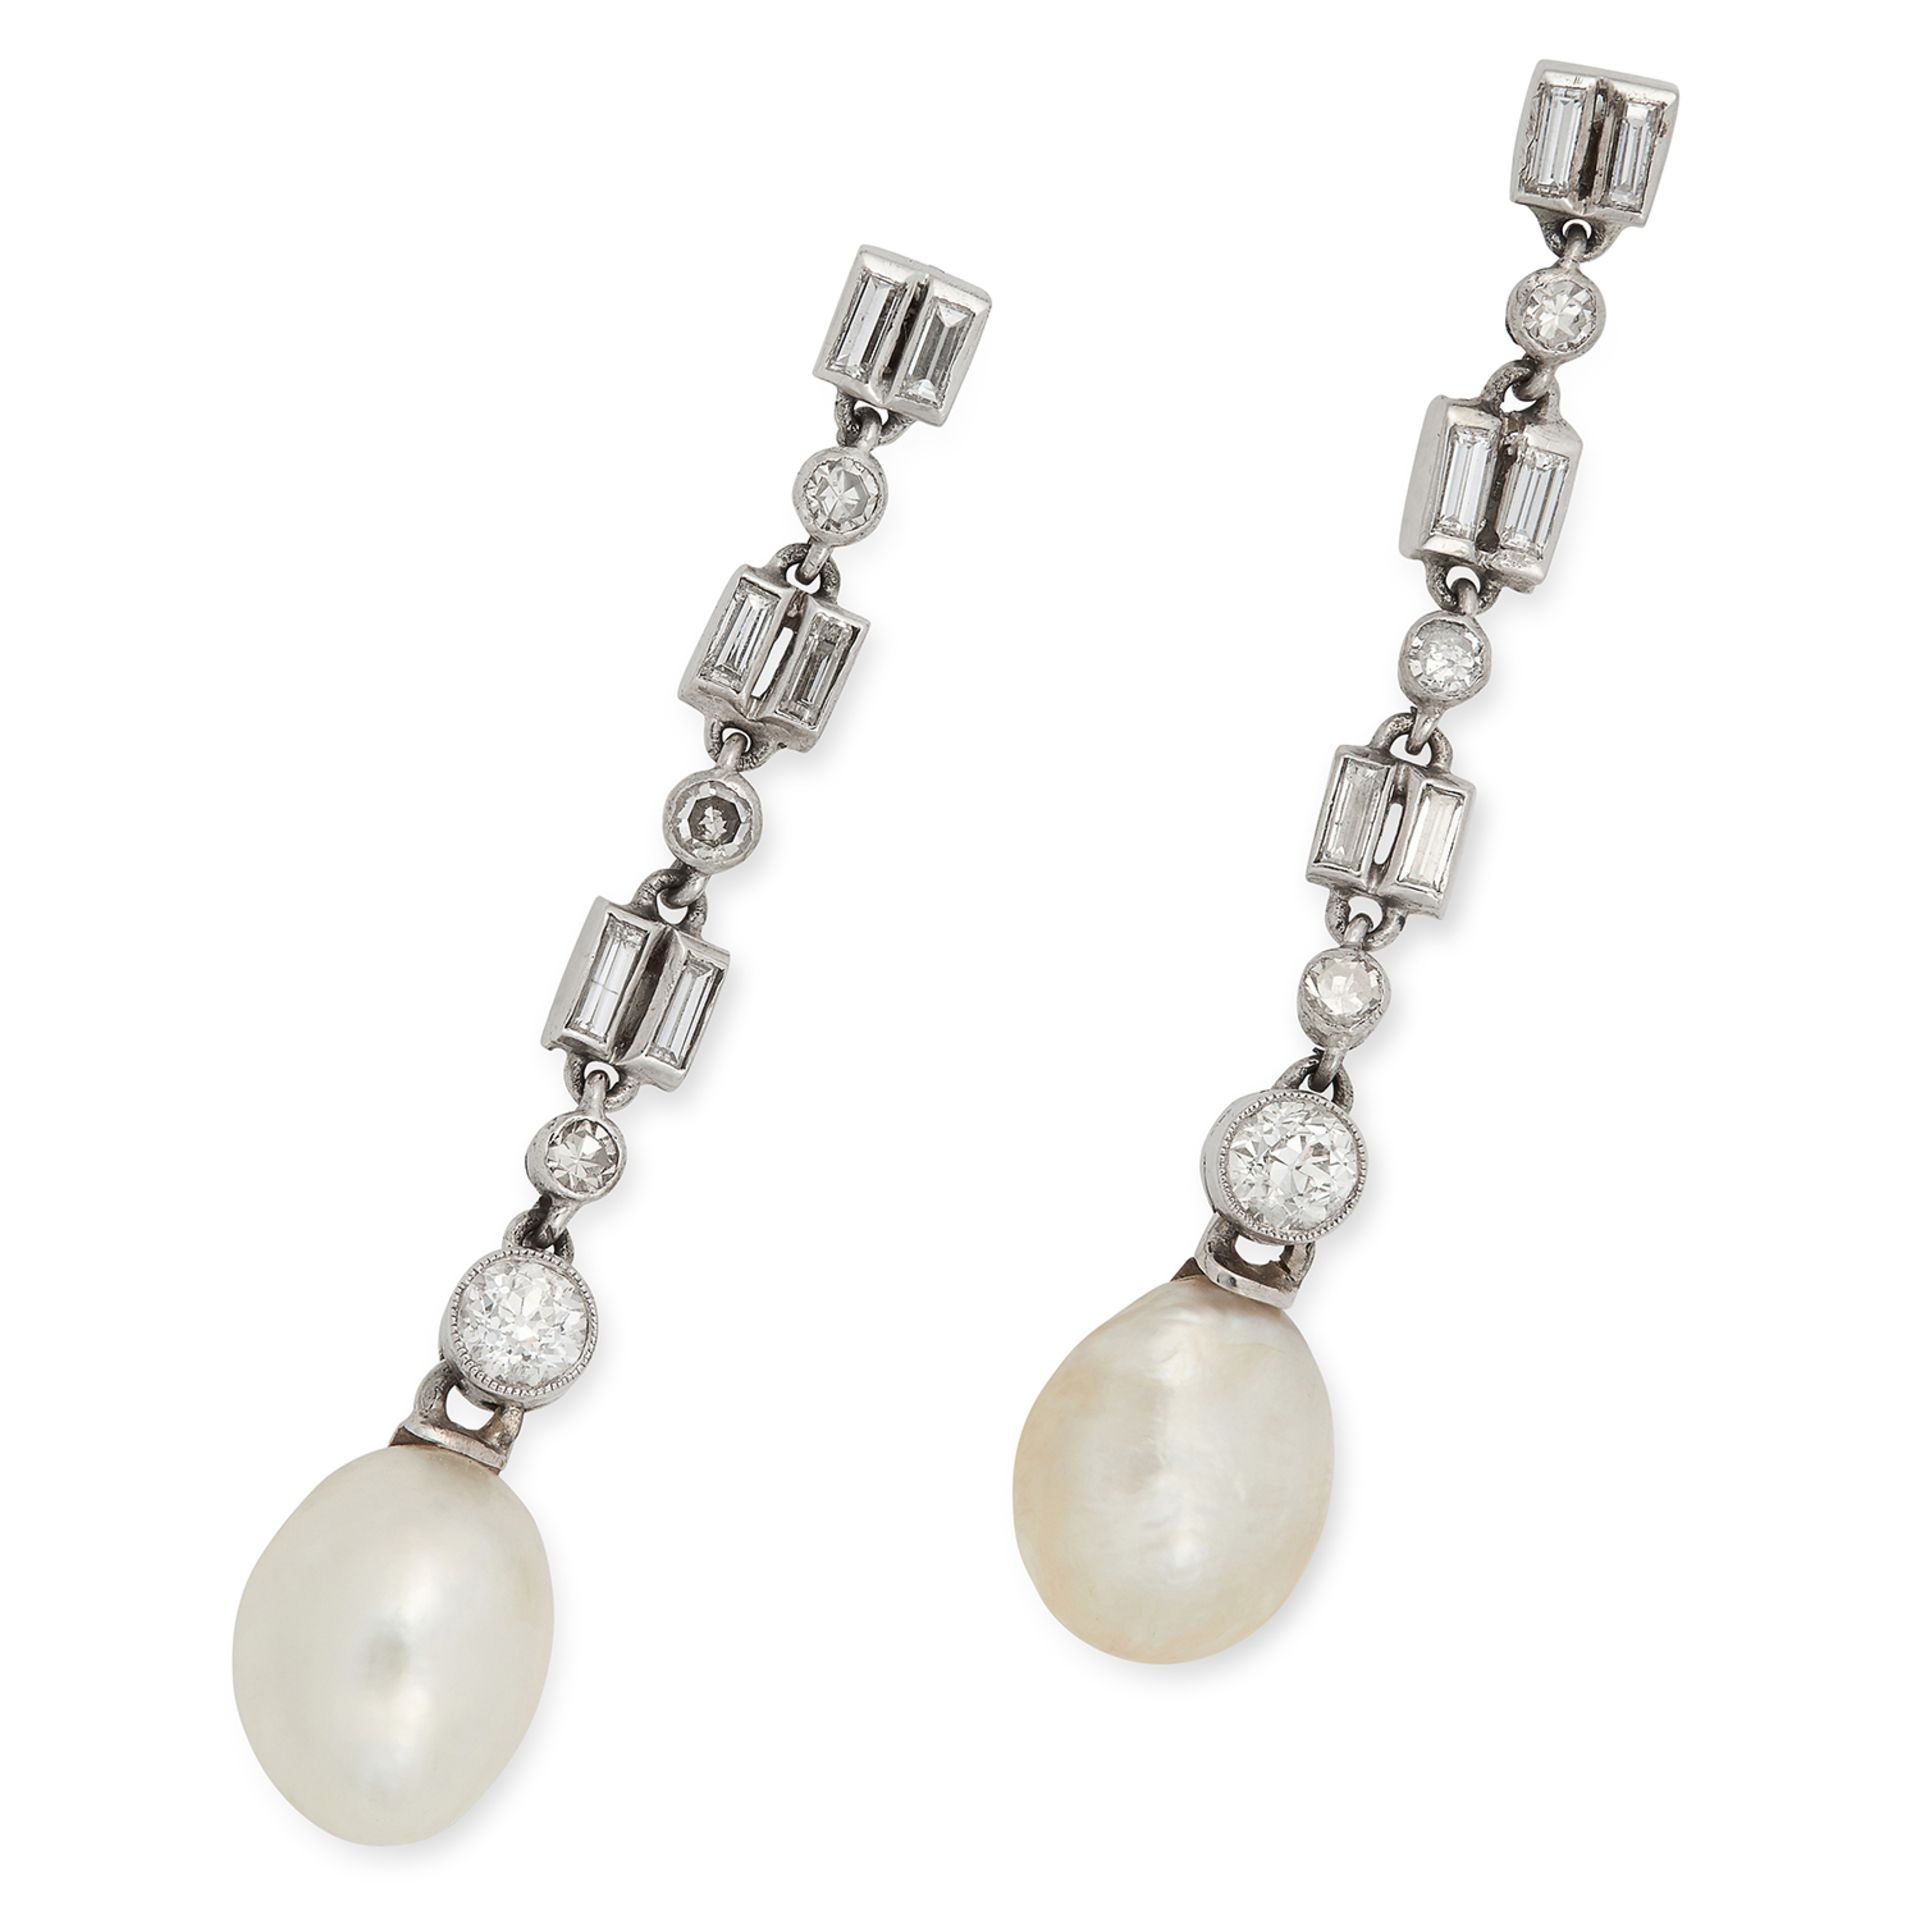 NATURAL SALTWATER PEARL AND DIAMOND DROP EARRINGS each set with alternating baguette and round cut